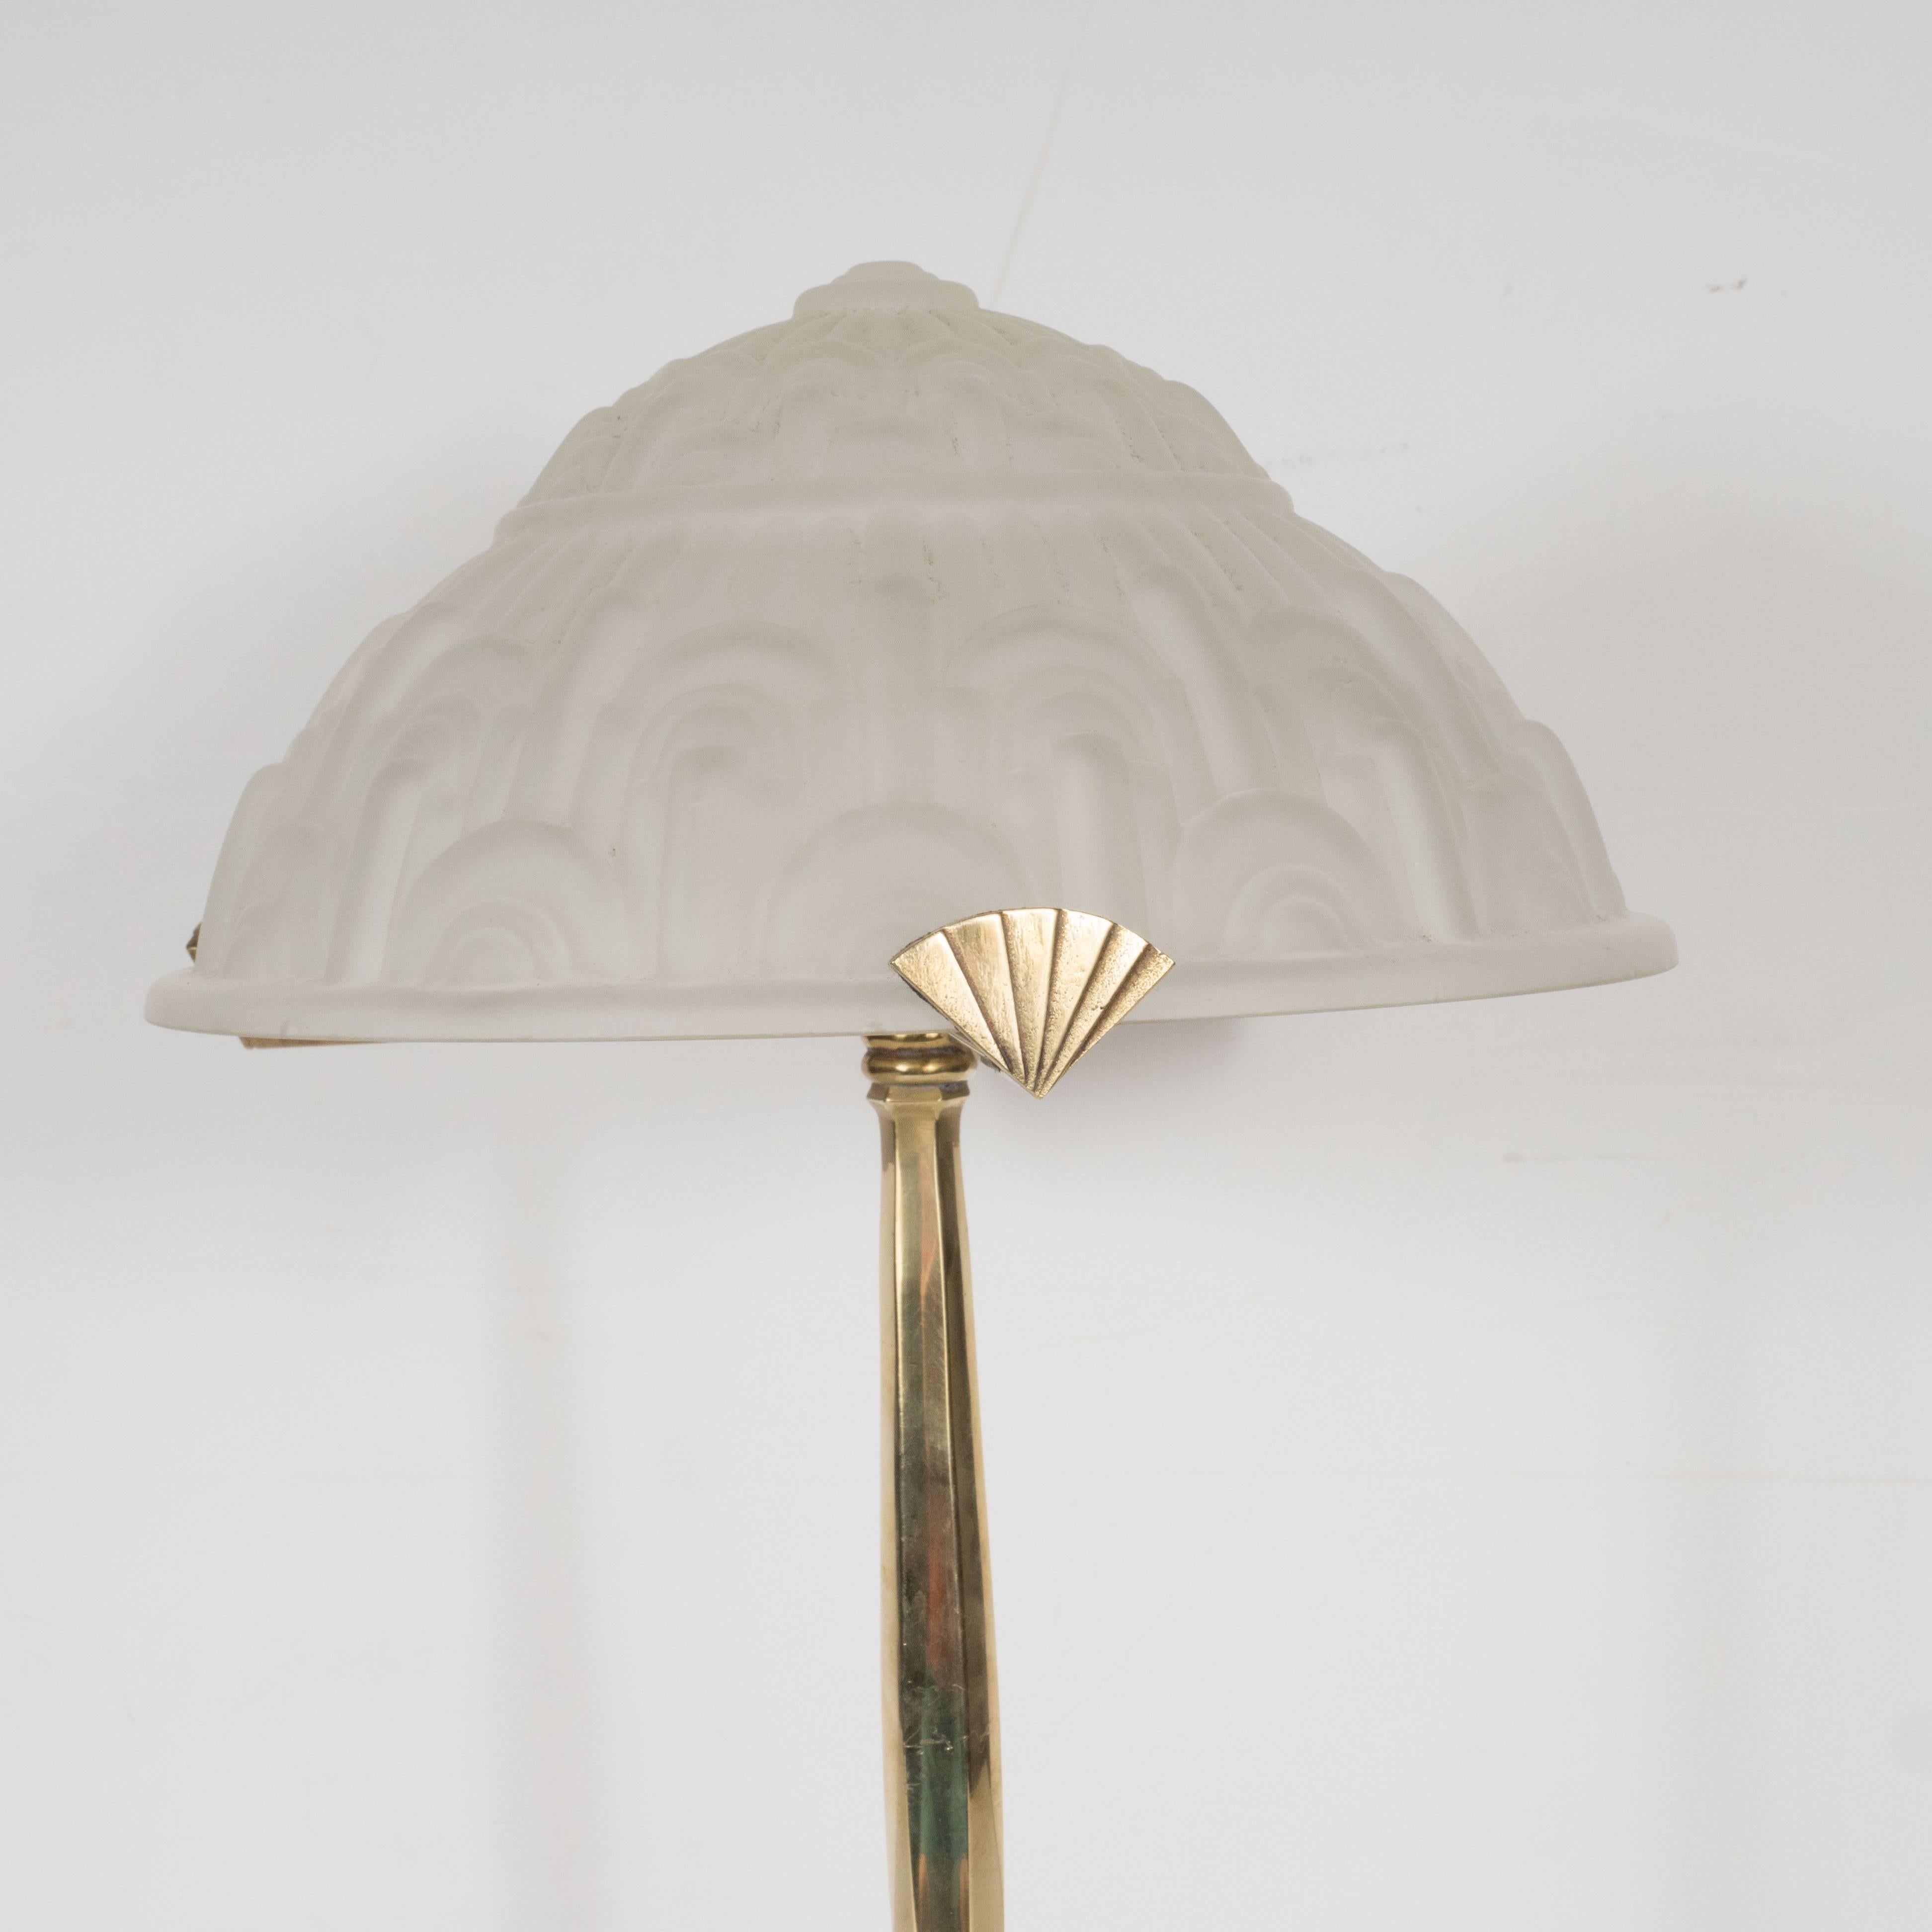 French Exquisite Art Deco Lamp in Gilded Bronze & Frosted Glass with Geometric Designs